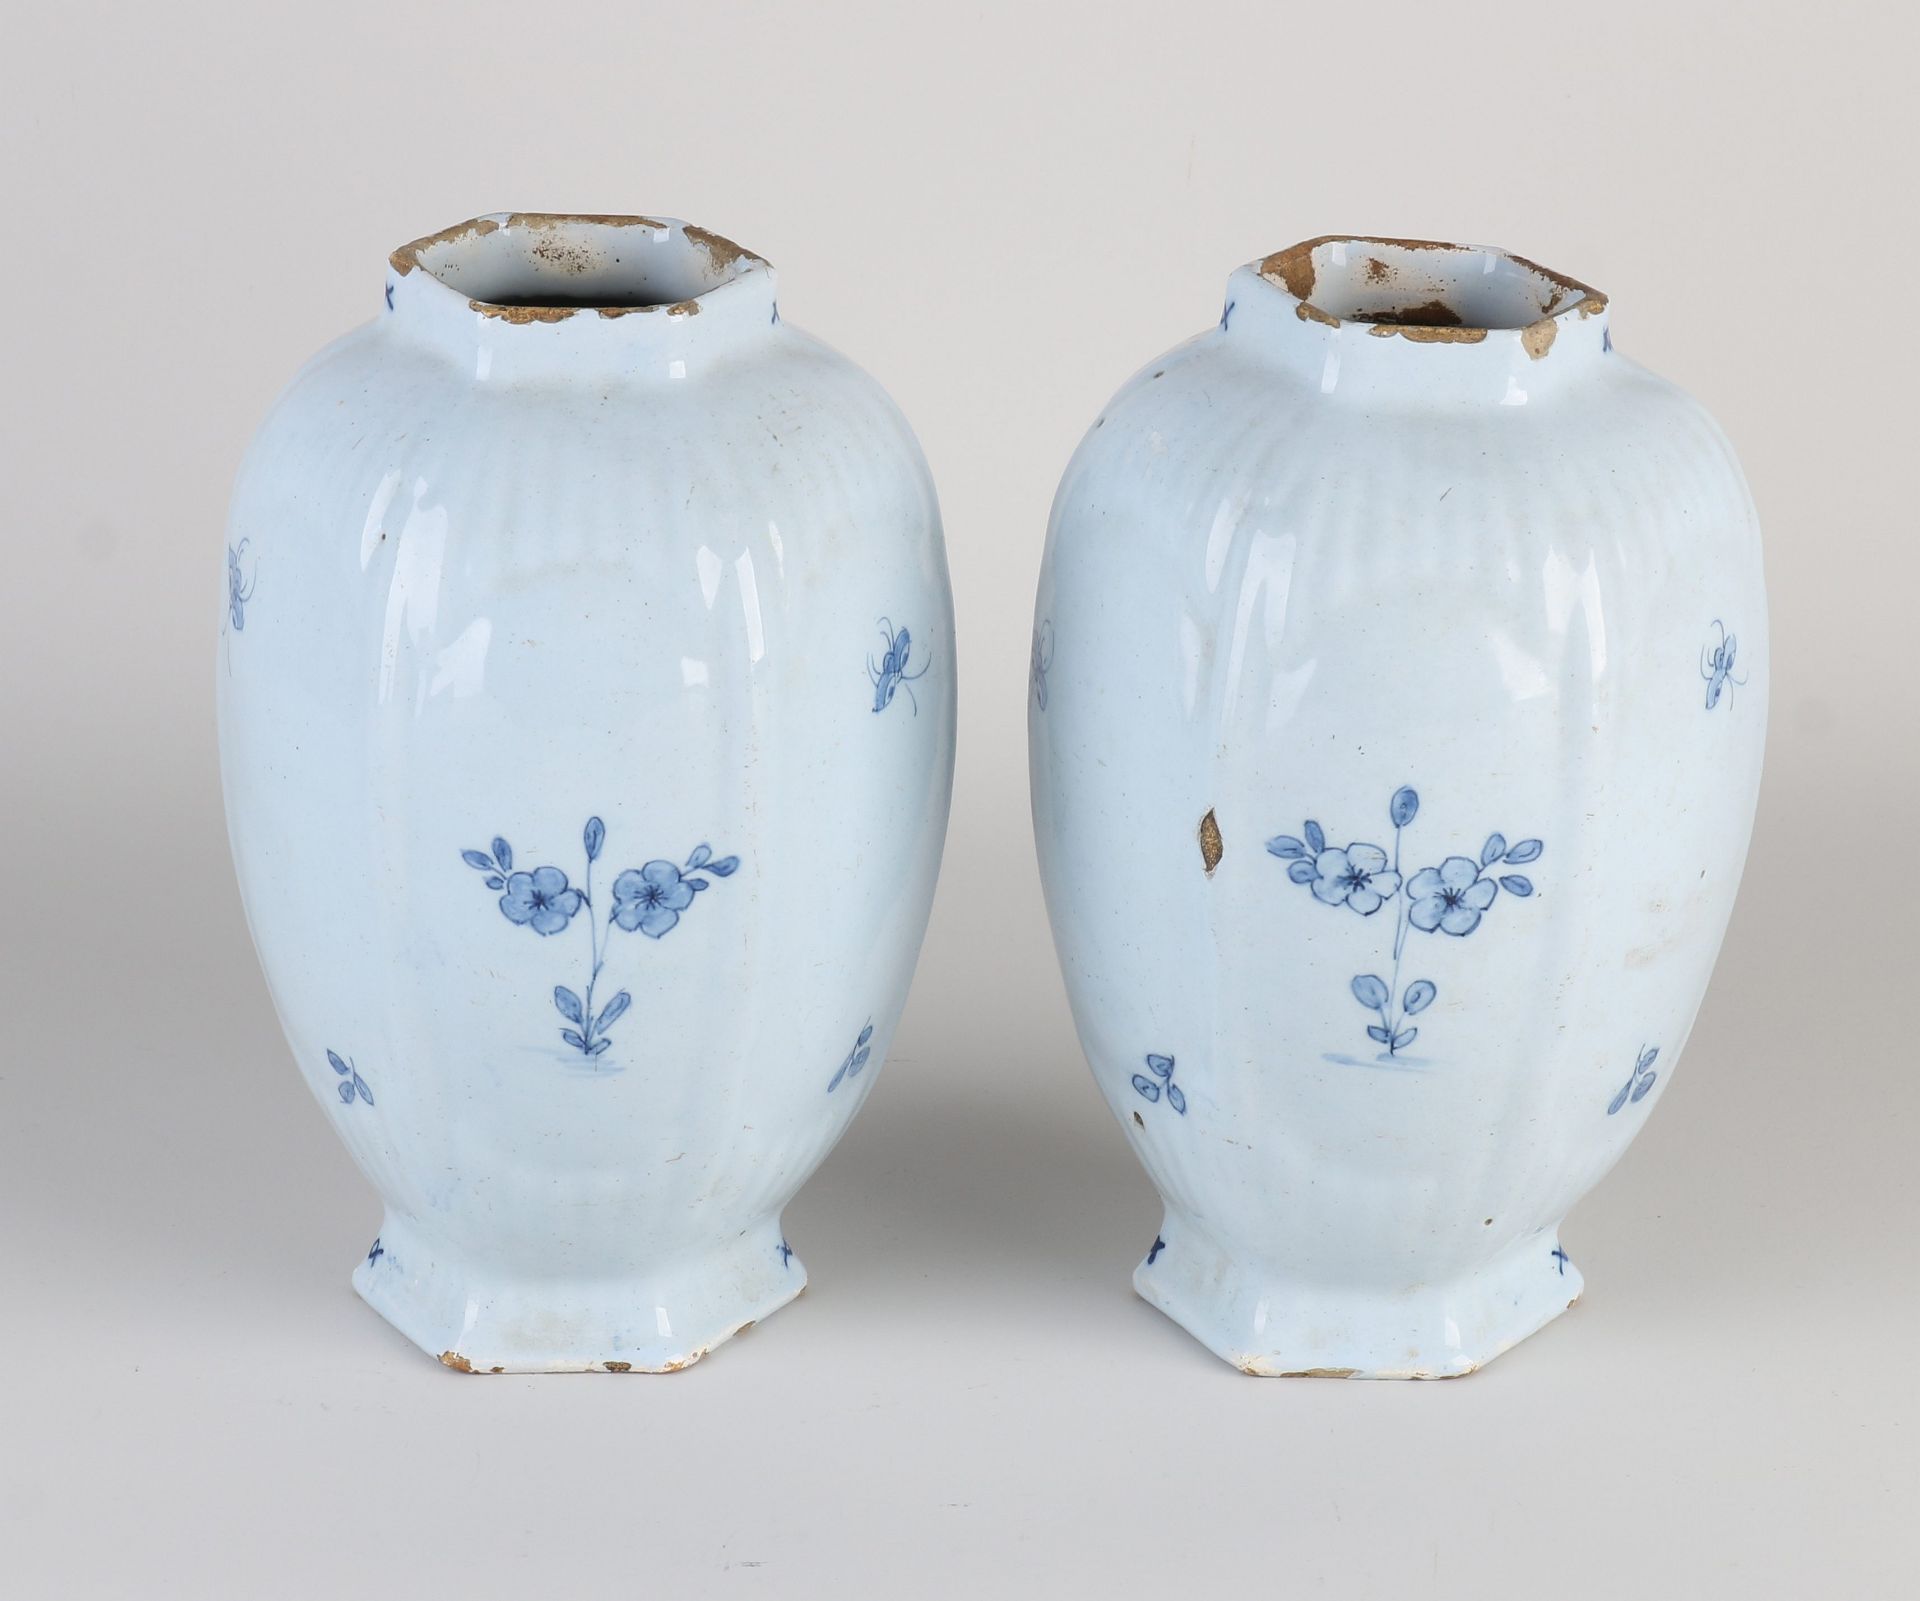 Two 18th century Delft vases, H 21 cm. - Image 2 of 3